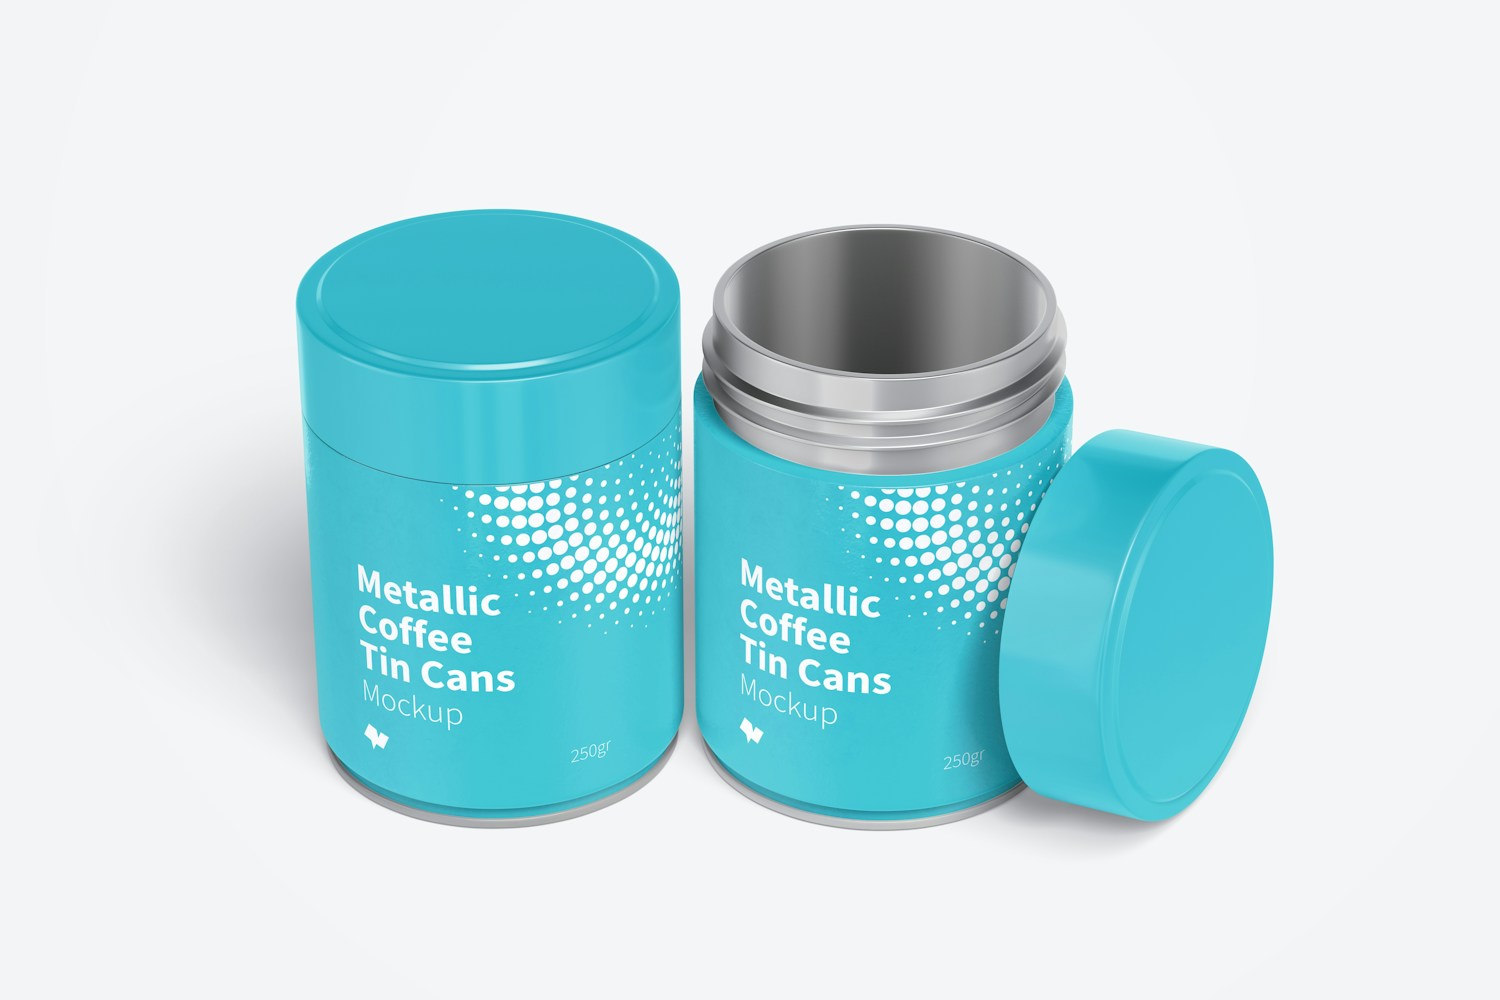 Metallic Coffee Tin Cans with Plastic Lids Mockup, Opened and Closed